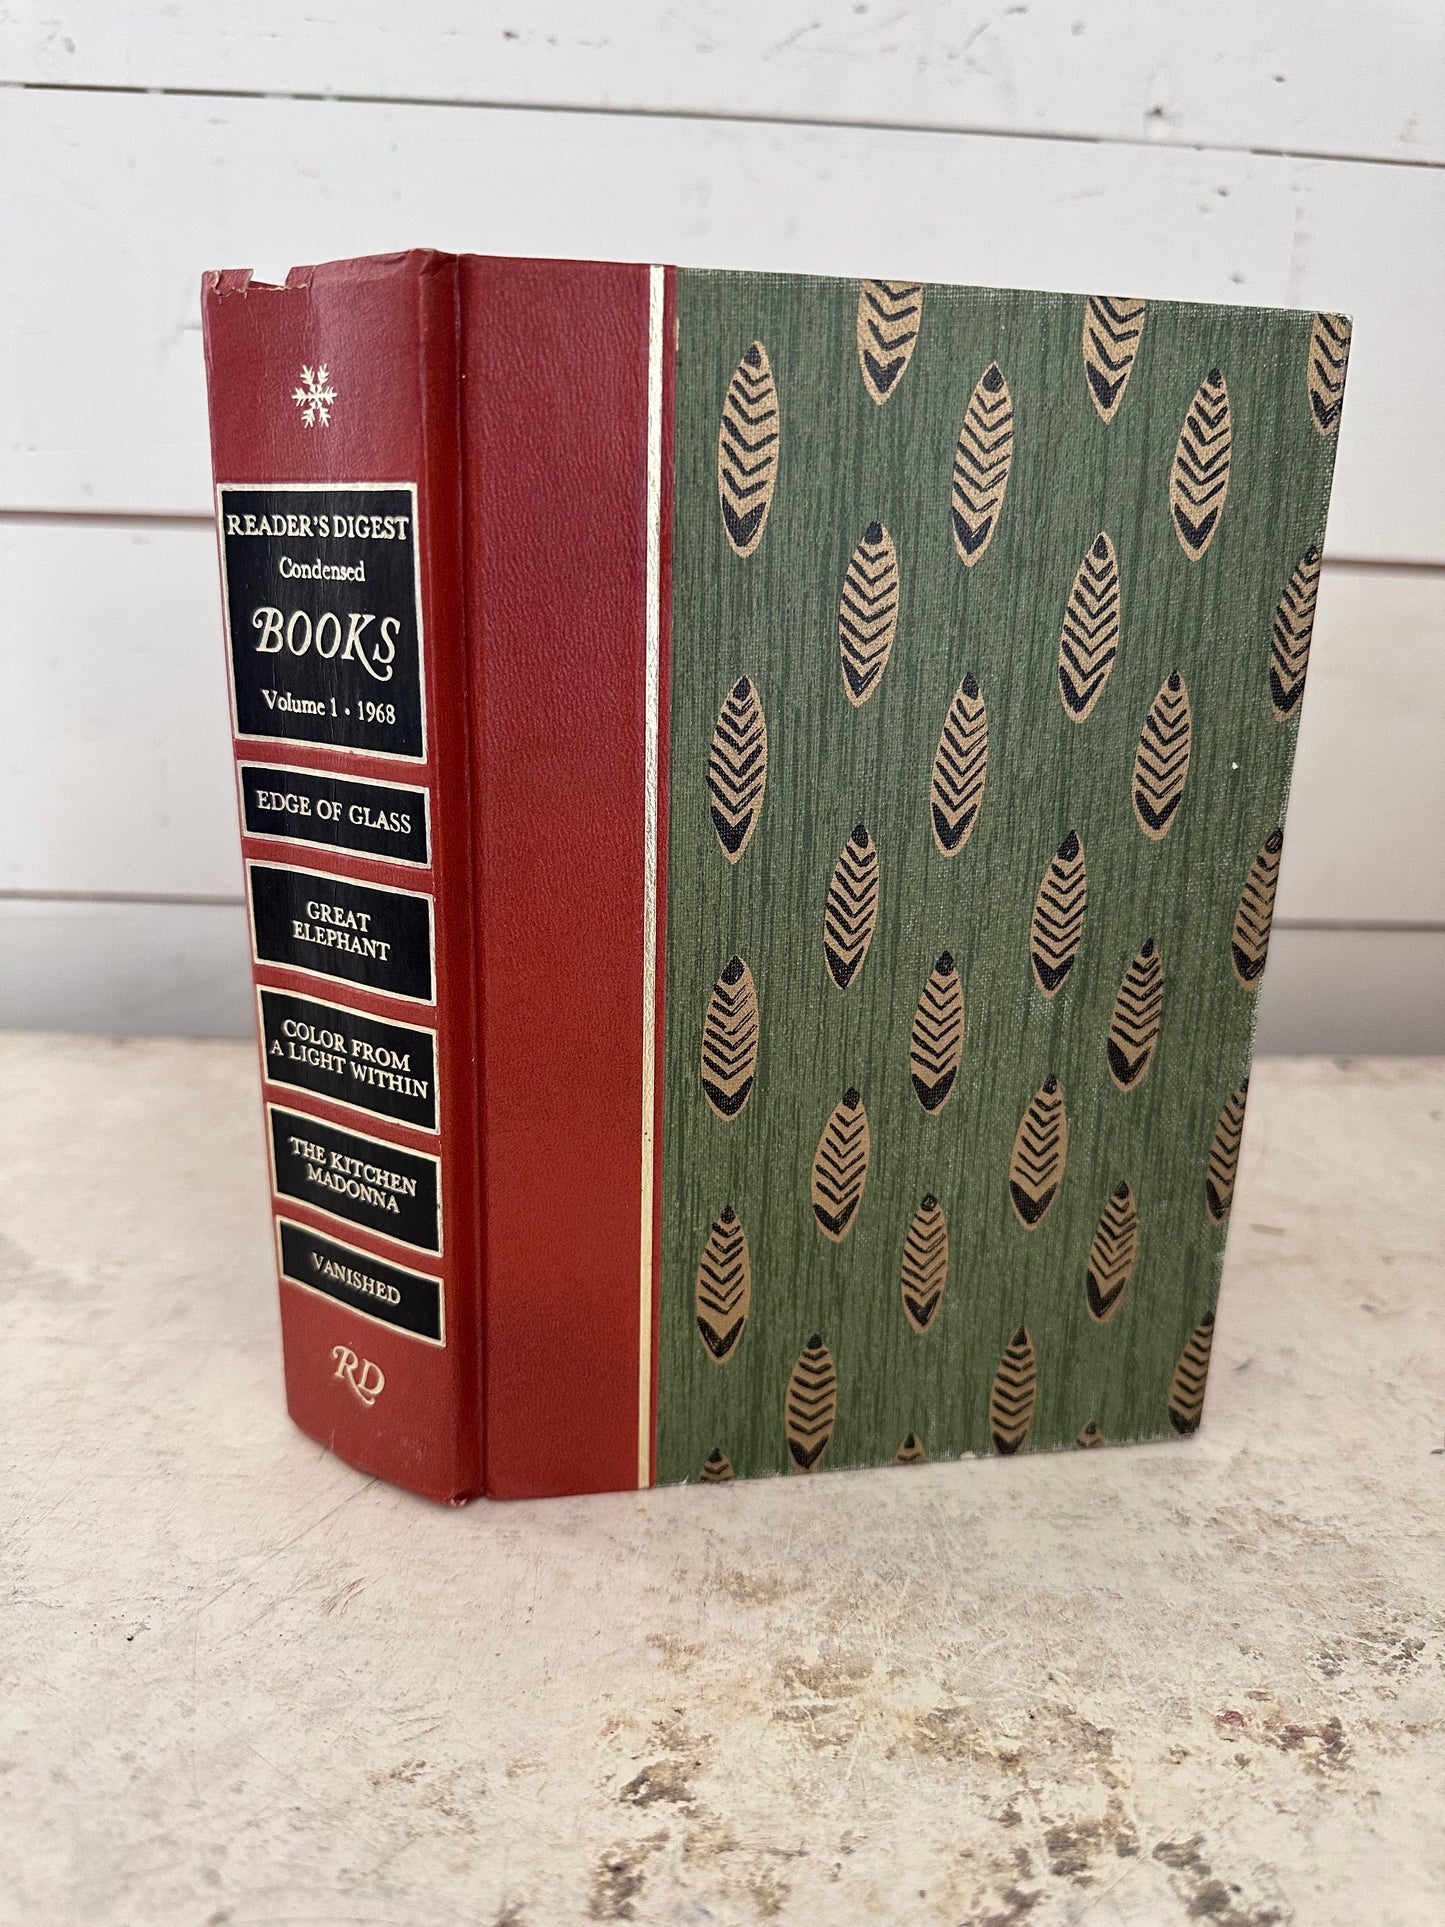 Readers Digest Book Collection - sold individually